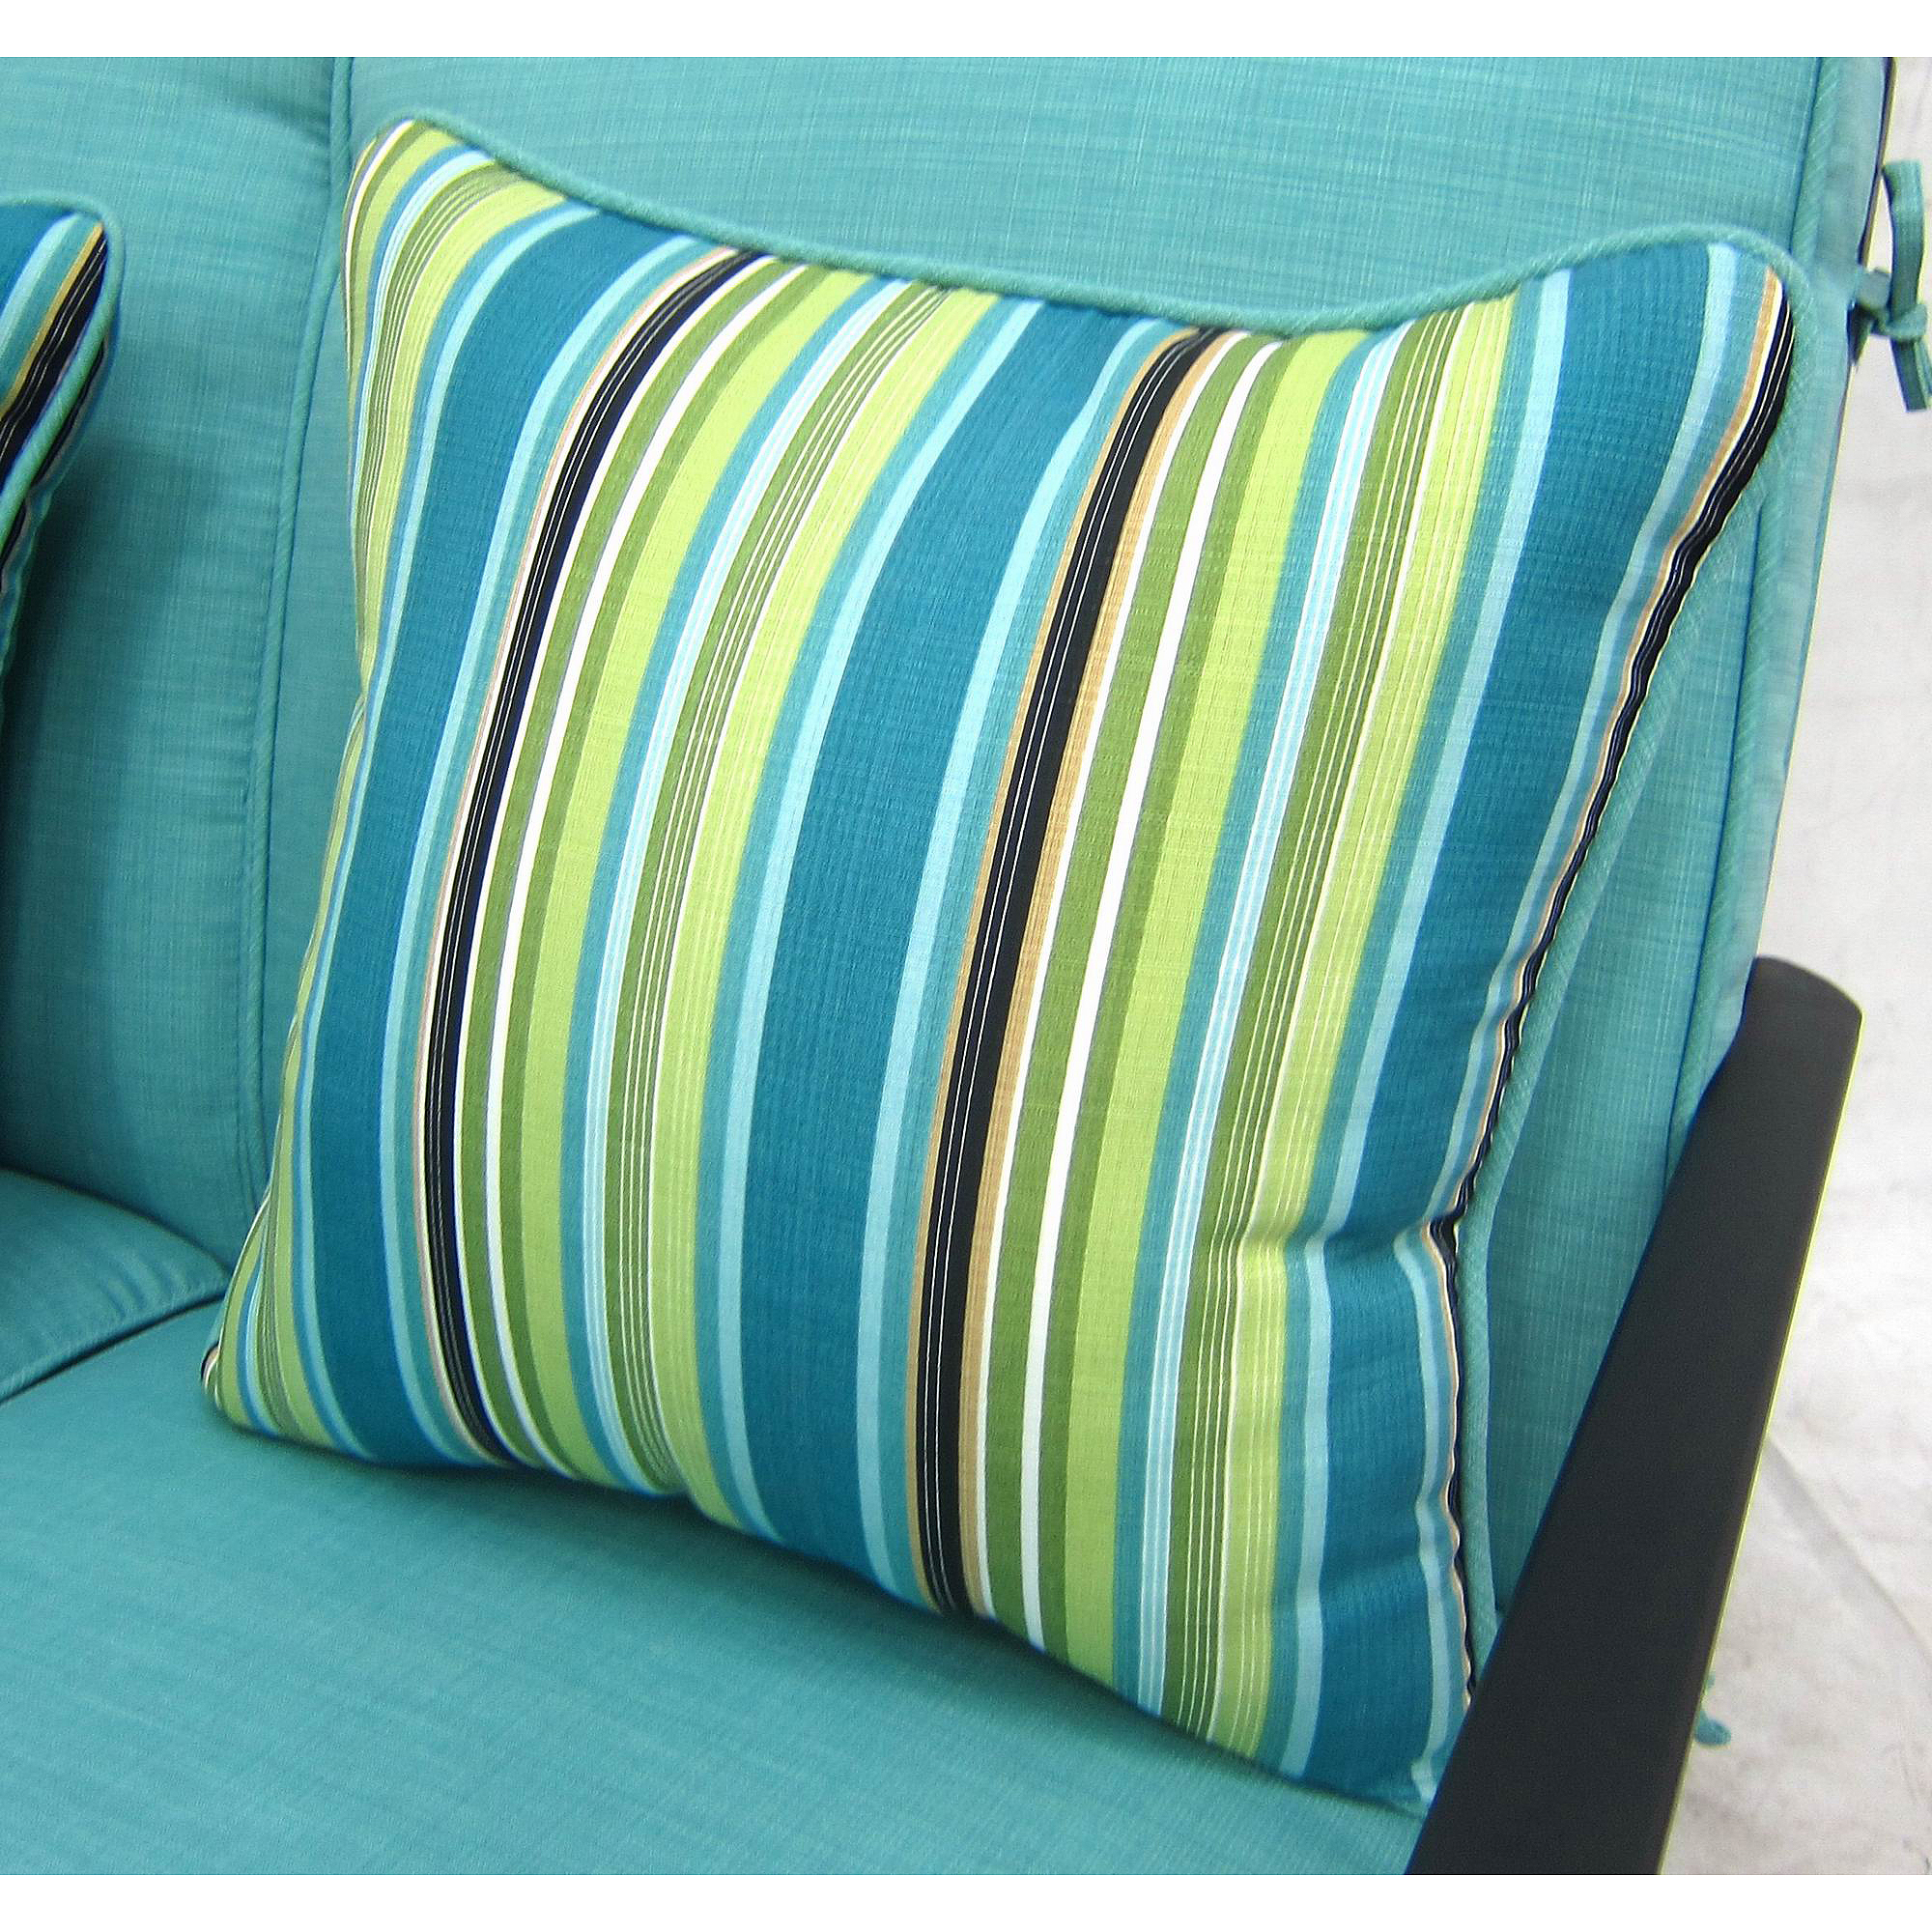 Mainstays Rockview 4-Piece Patio Conversation Set, Seats 4 with Blue Cushions - image 3 of 5